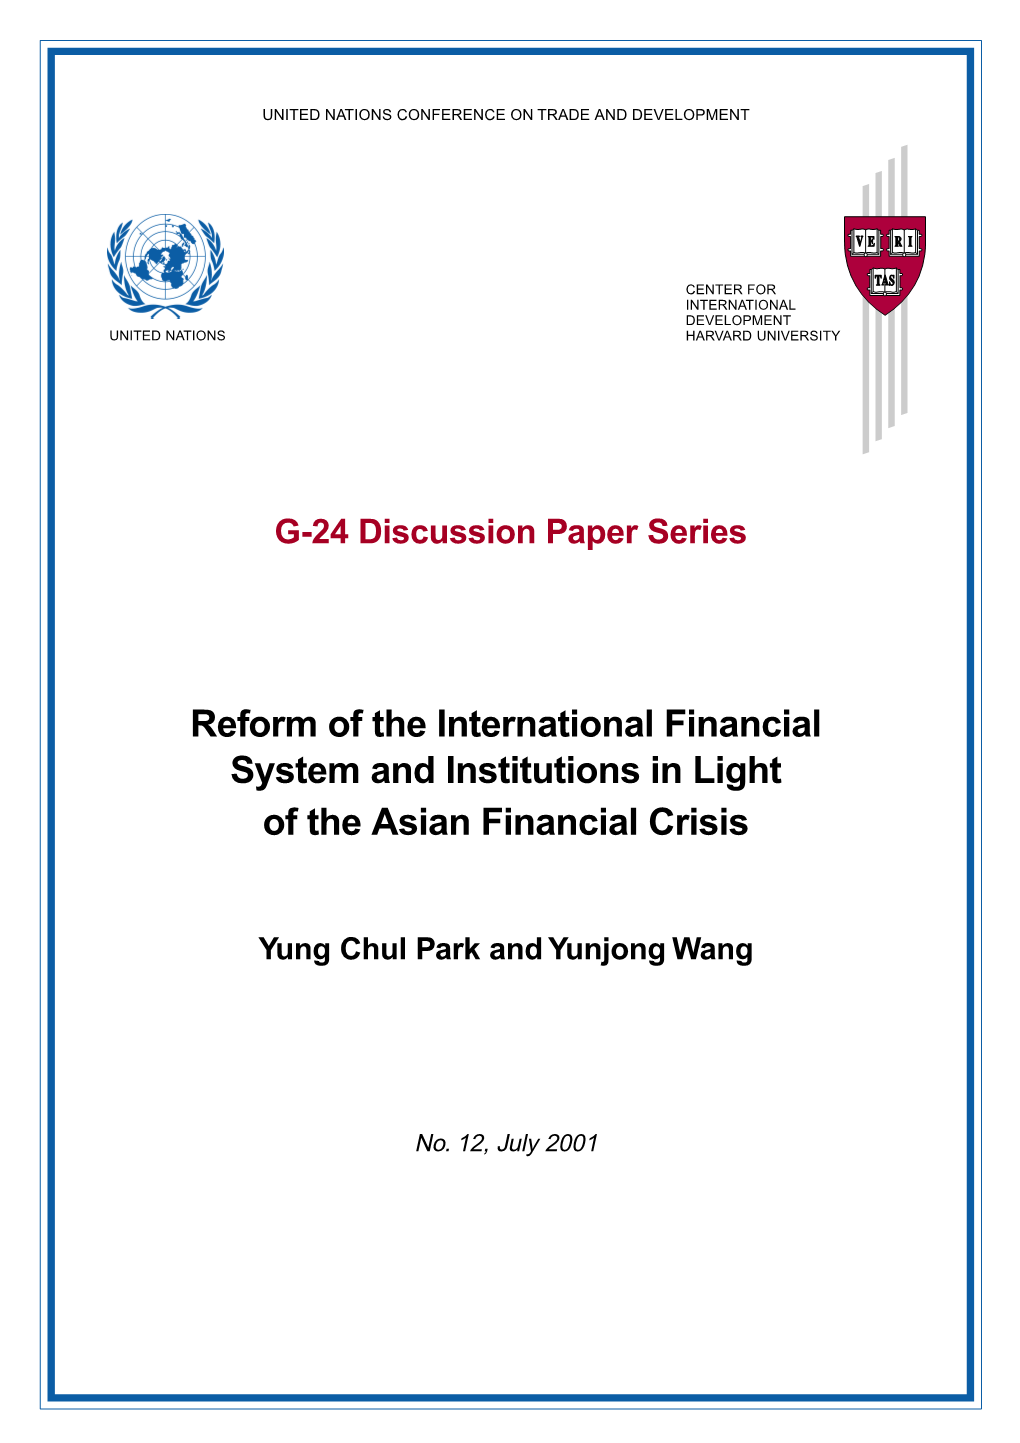 Reform of the International Financial System and Institutions in Light of the Asian Financial Crisis